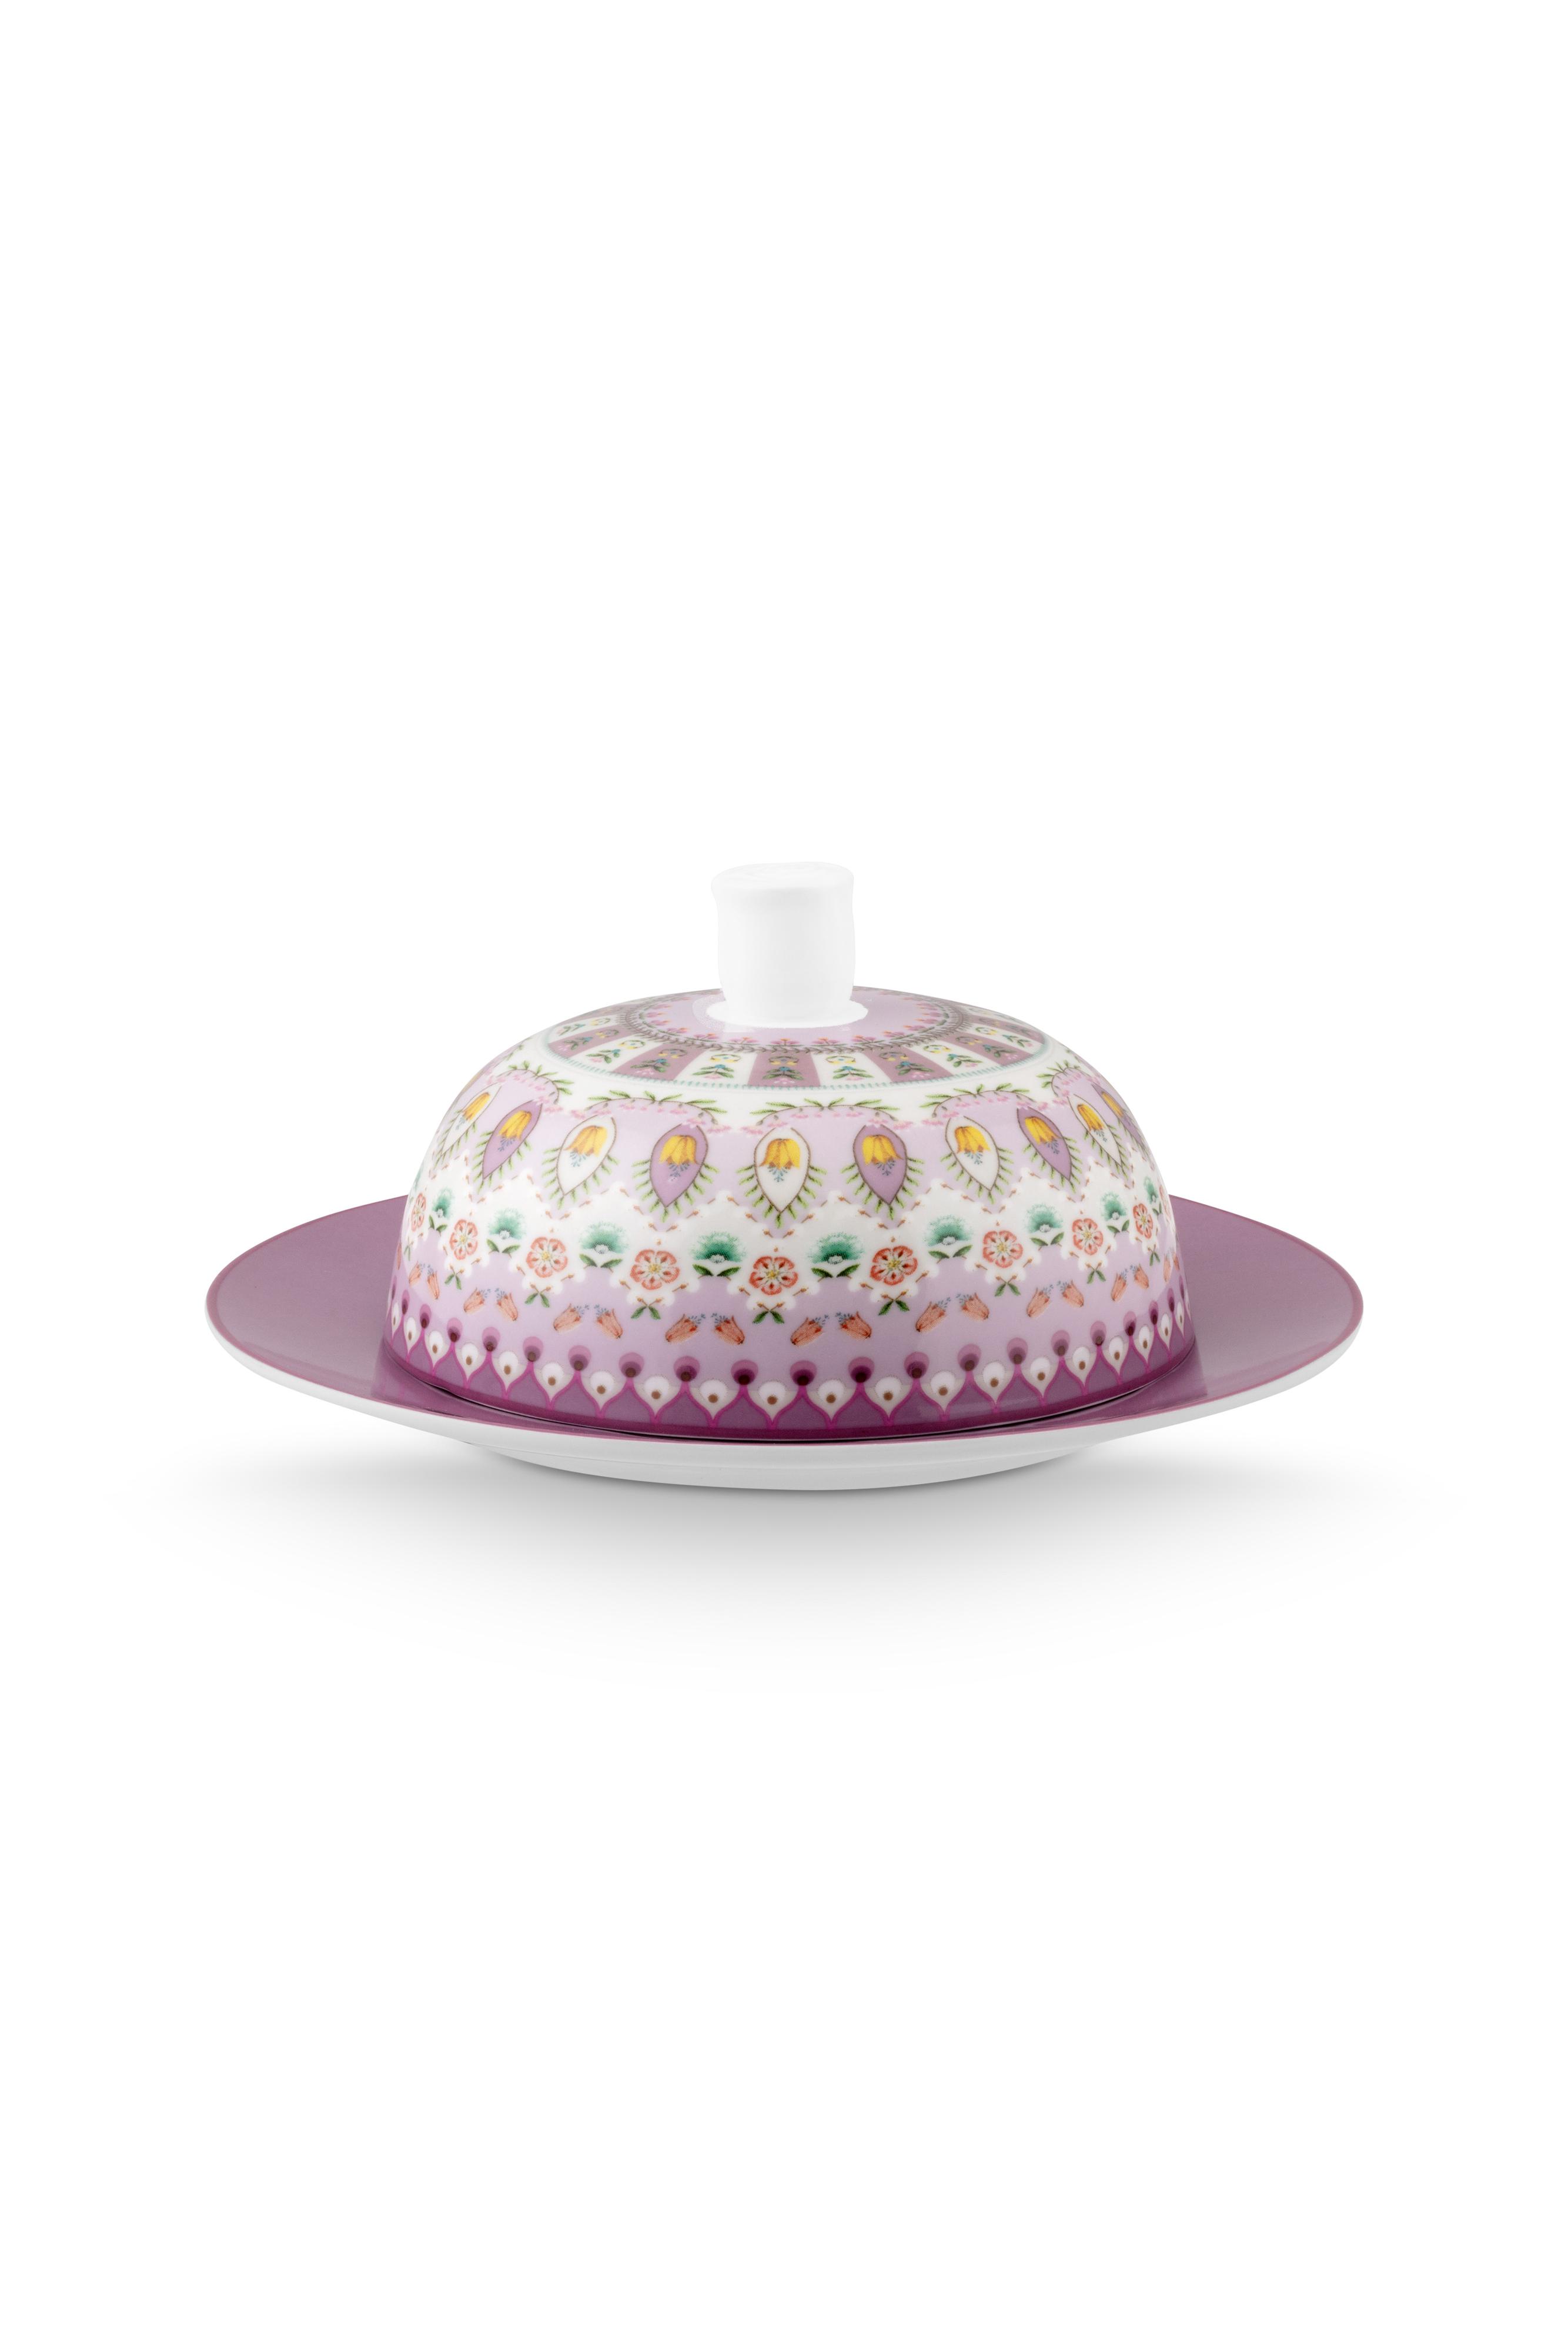 Butter Dish Round Lily-lotus Moon Multi 17x8cm Gift